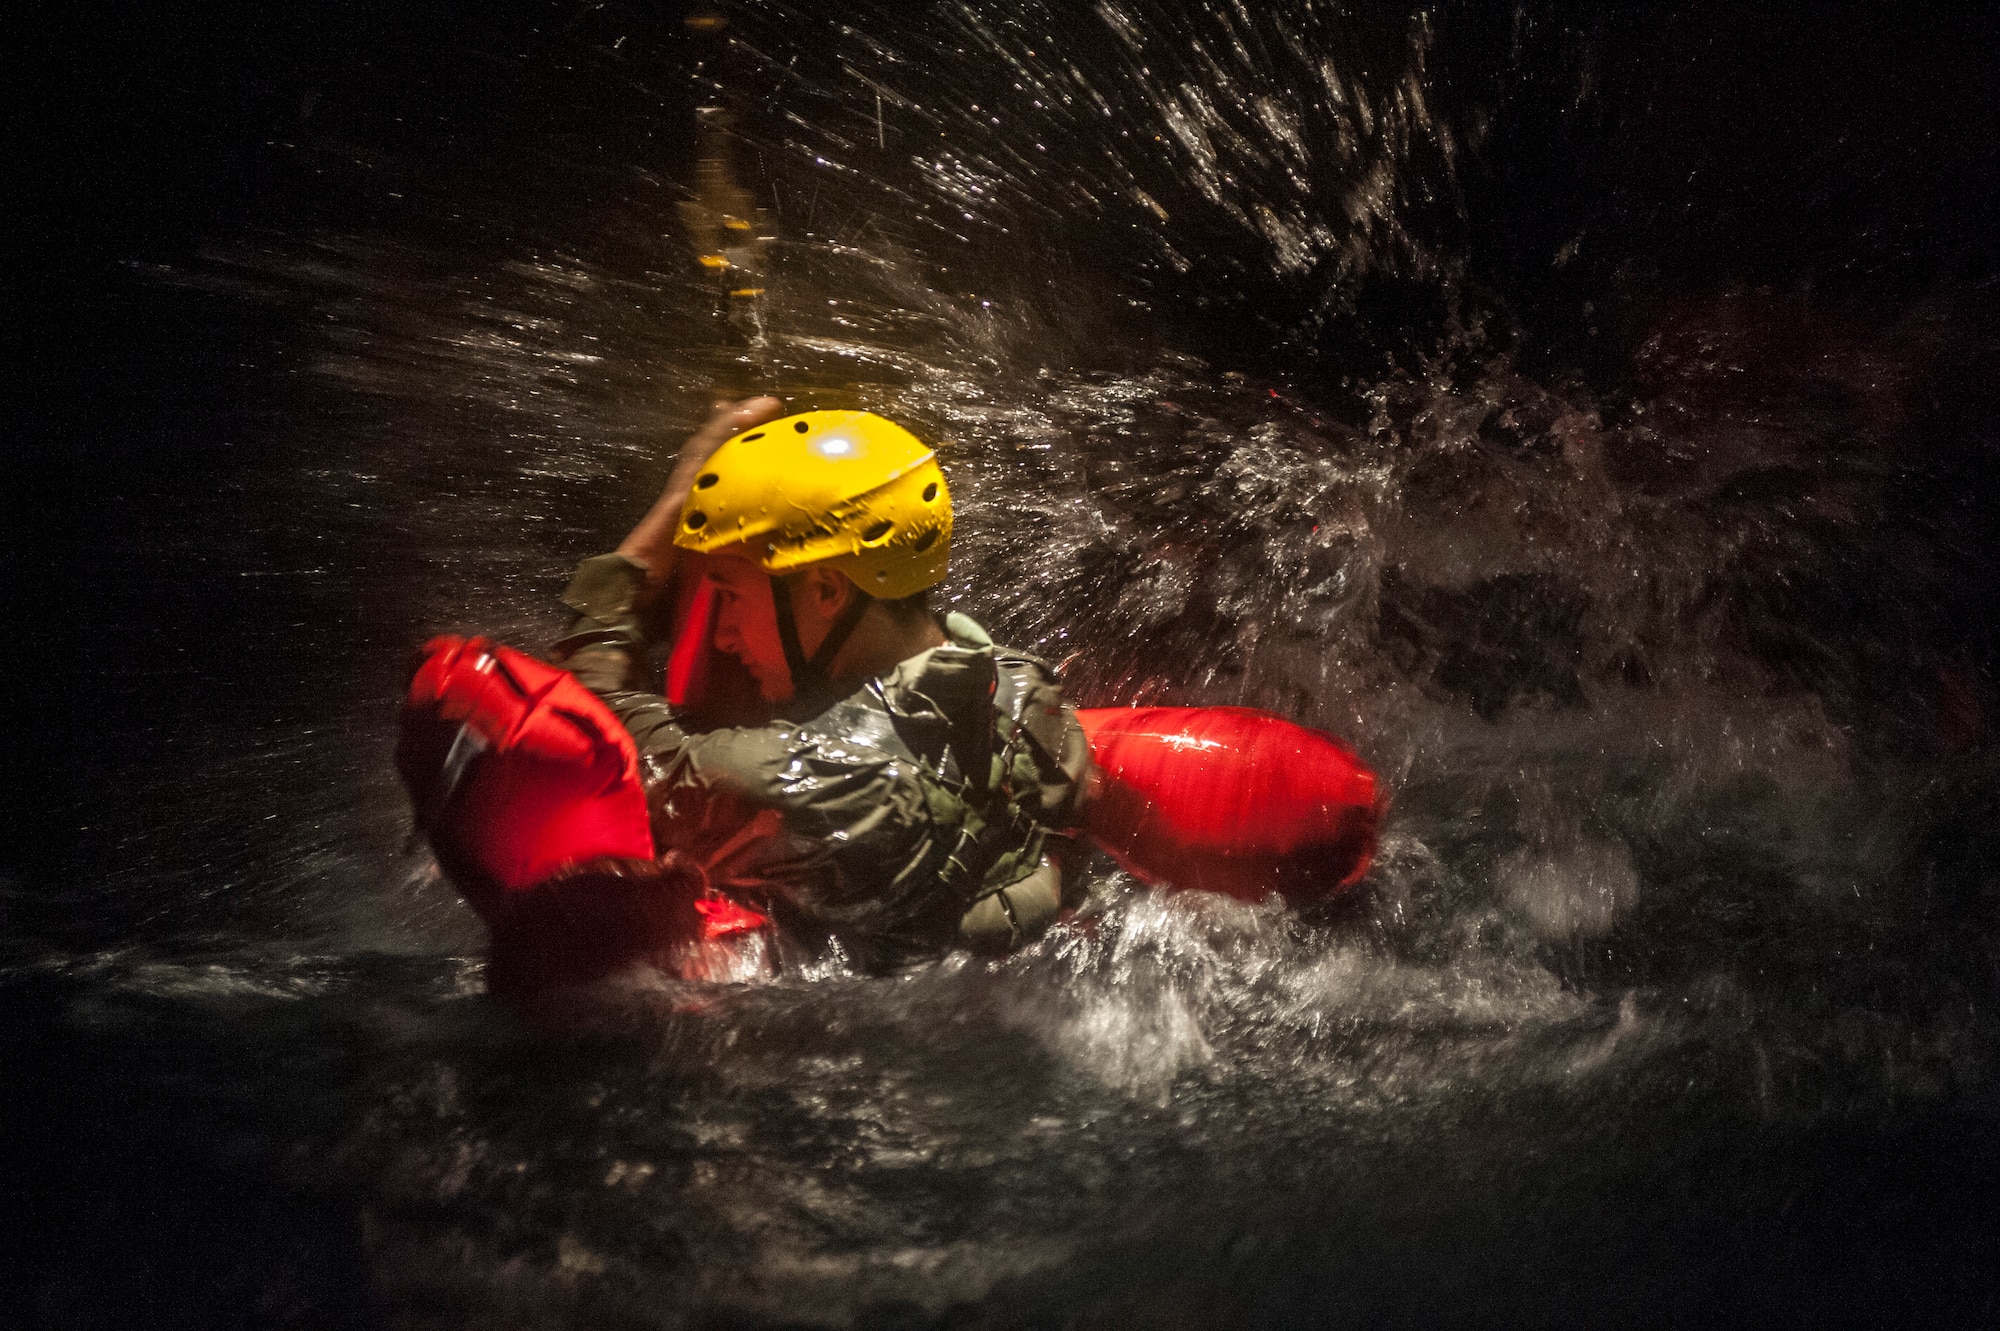 A Water Survival student braves the turbulent waters before getting hoisted into the fuselage during a training scenario Dec. 8, 2015, at Fairchild Air Force Base, Wash. The survival gear available to Airmen depends on what aircraft they are flying in and under what command the aircraft is flying. Different commands pack different items, but as a standard, aircraft have a raft, raft canopy, canopy poles, rations, medical supplies, radio, signaling devices and a form of water or a way of procuring fresh water. (U.S. Air Force photo/Airman 1st Class Sean Campbell)